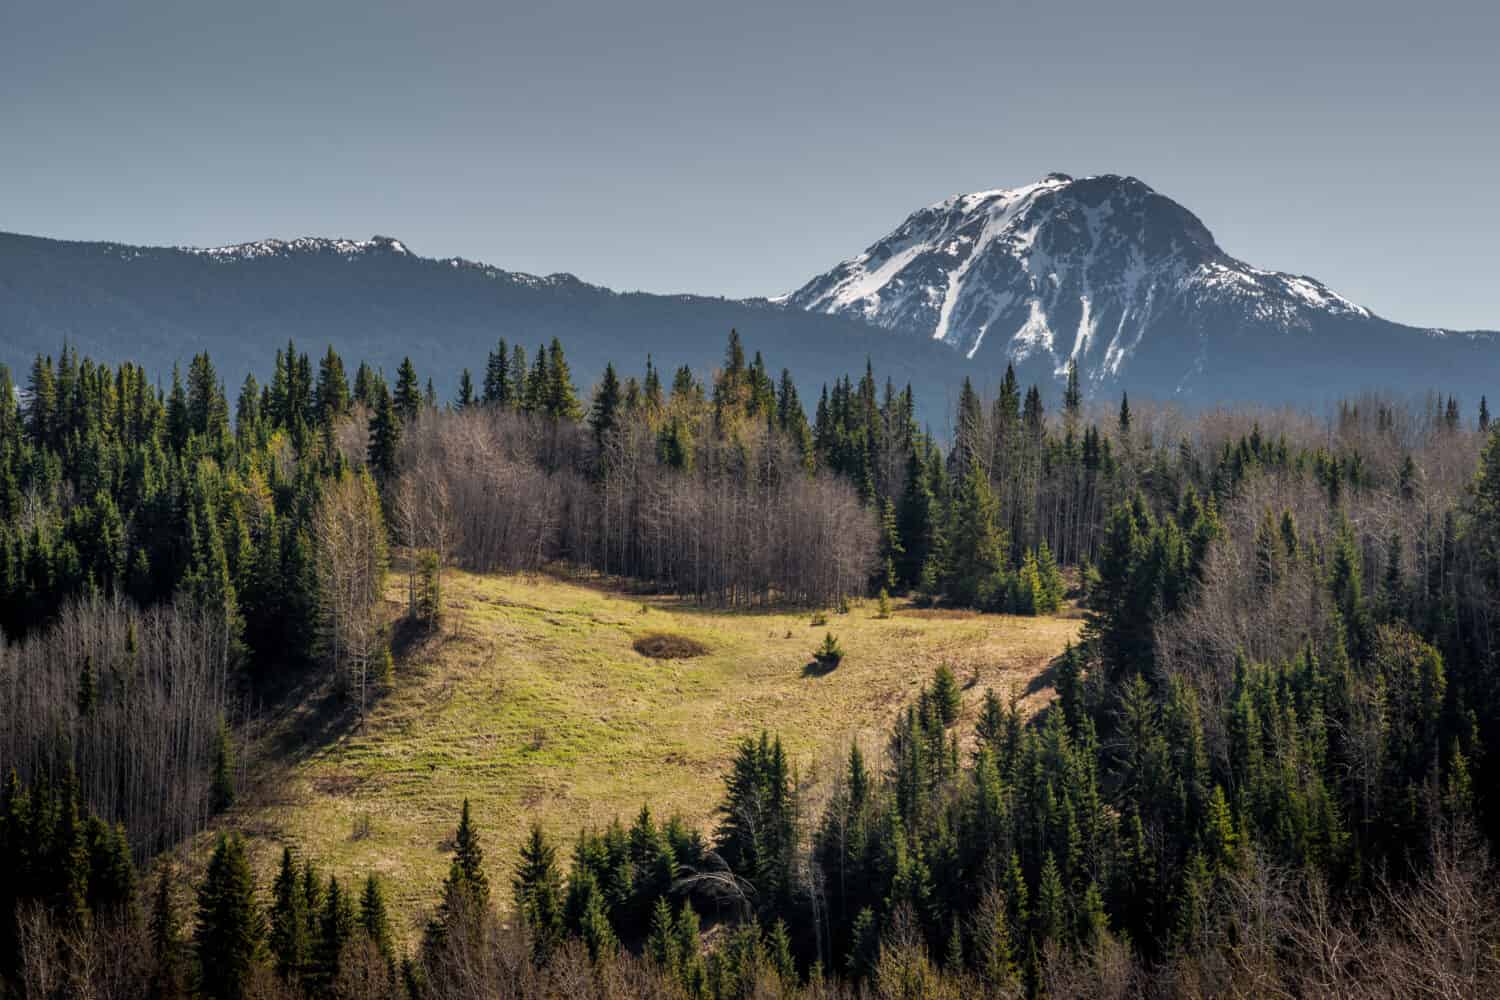 Spring in the northern mountains and boreal forest of BC Canada.